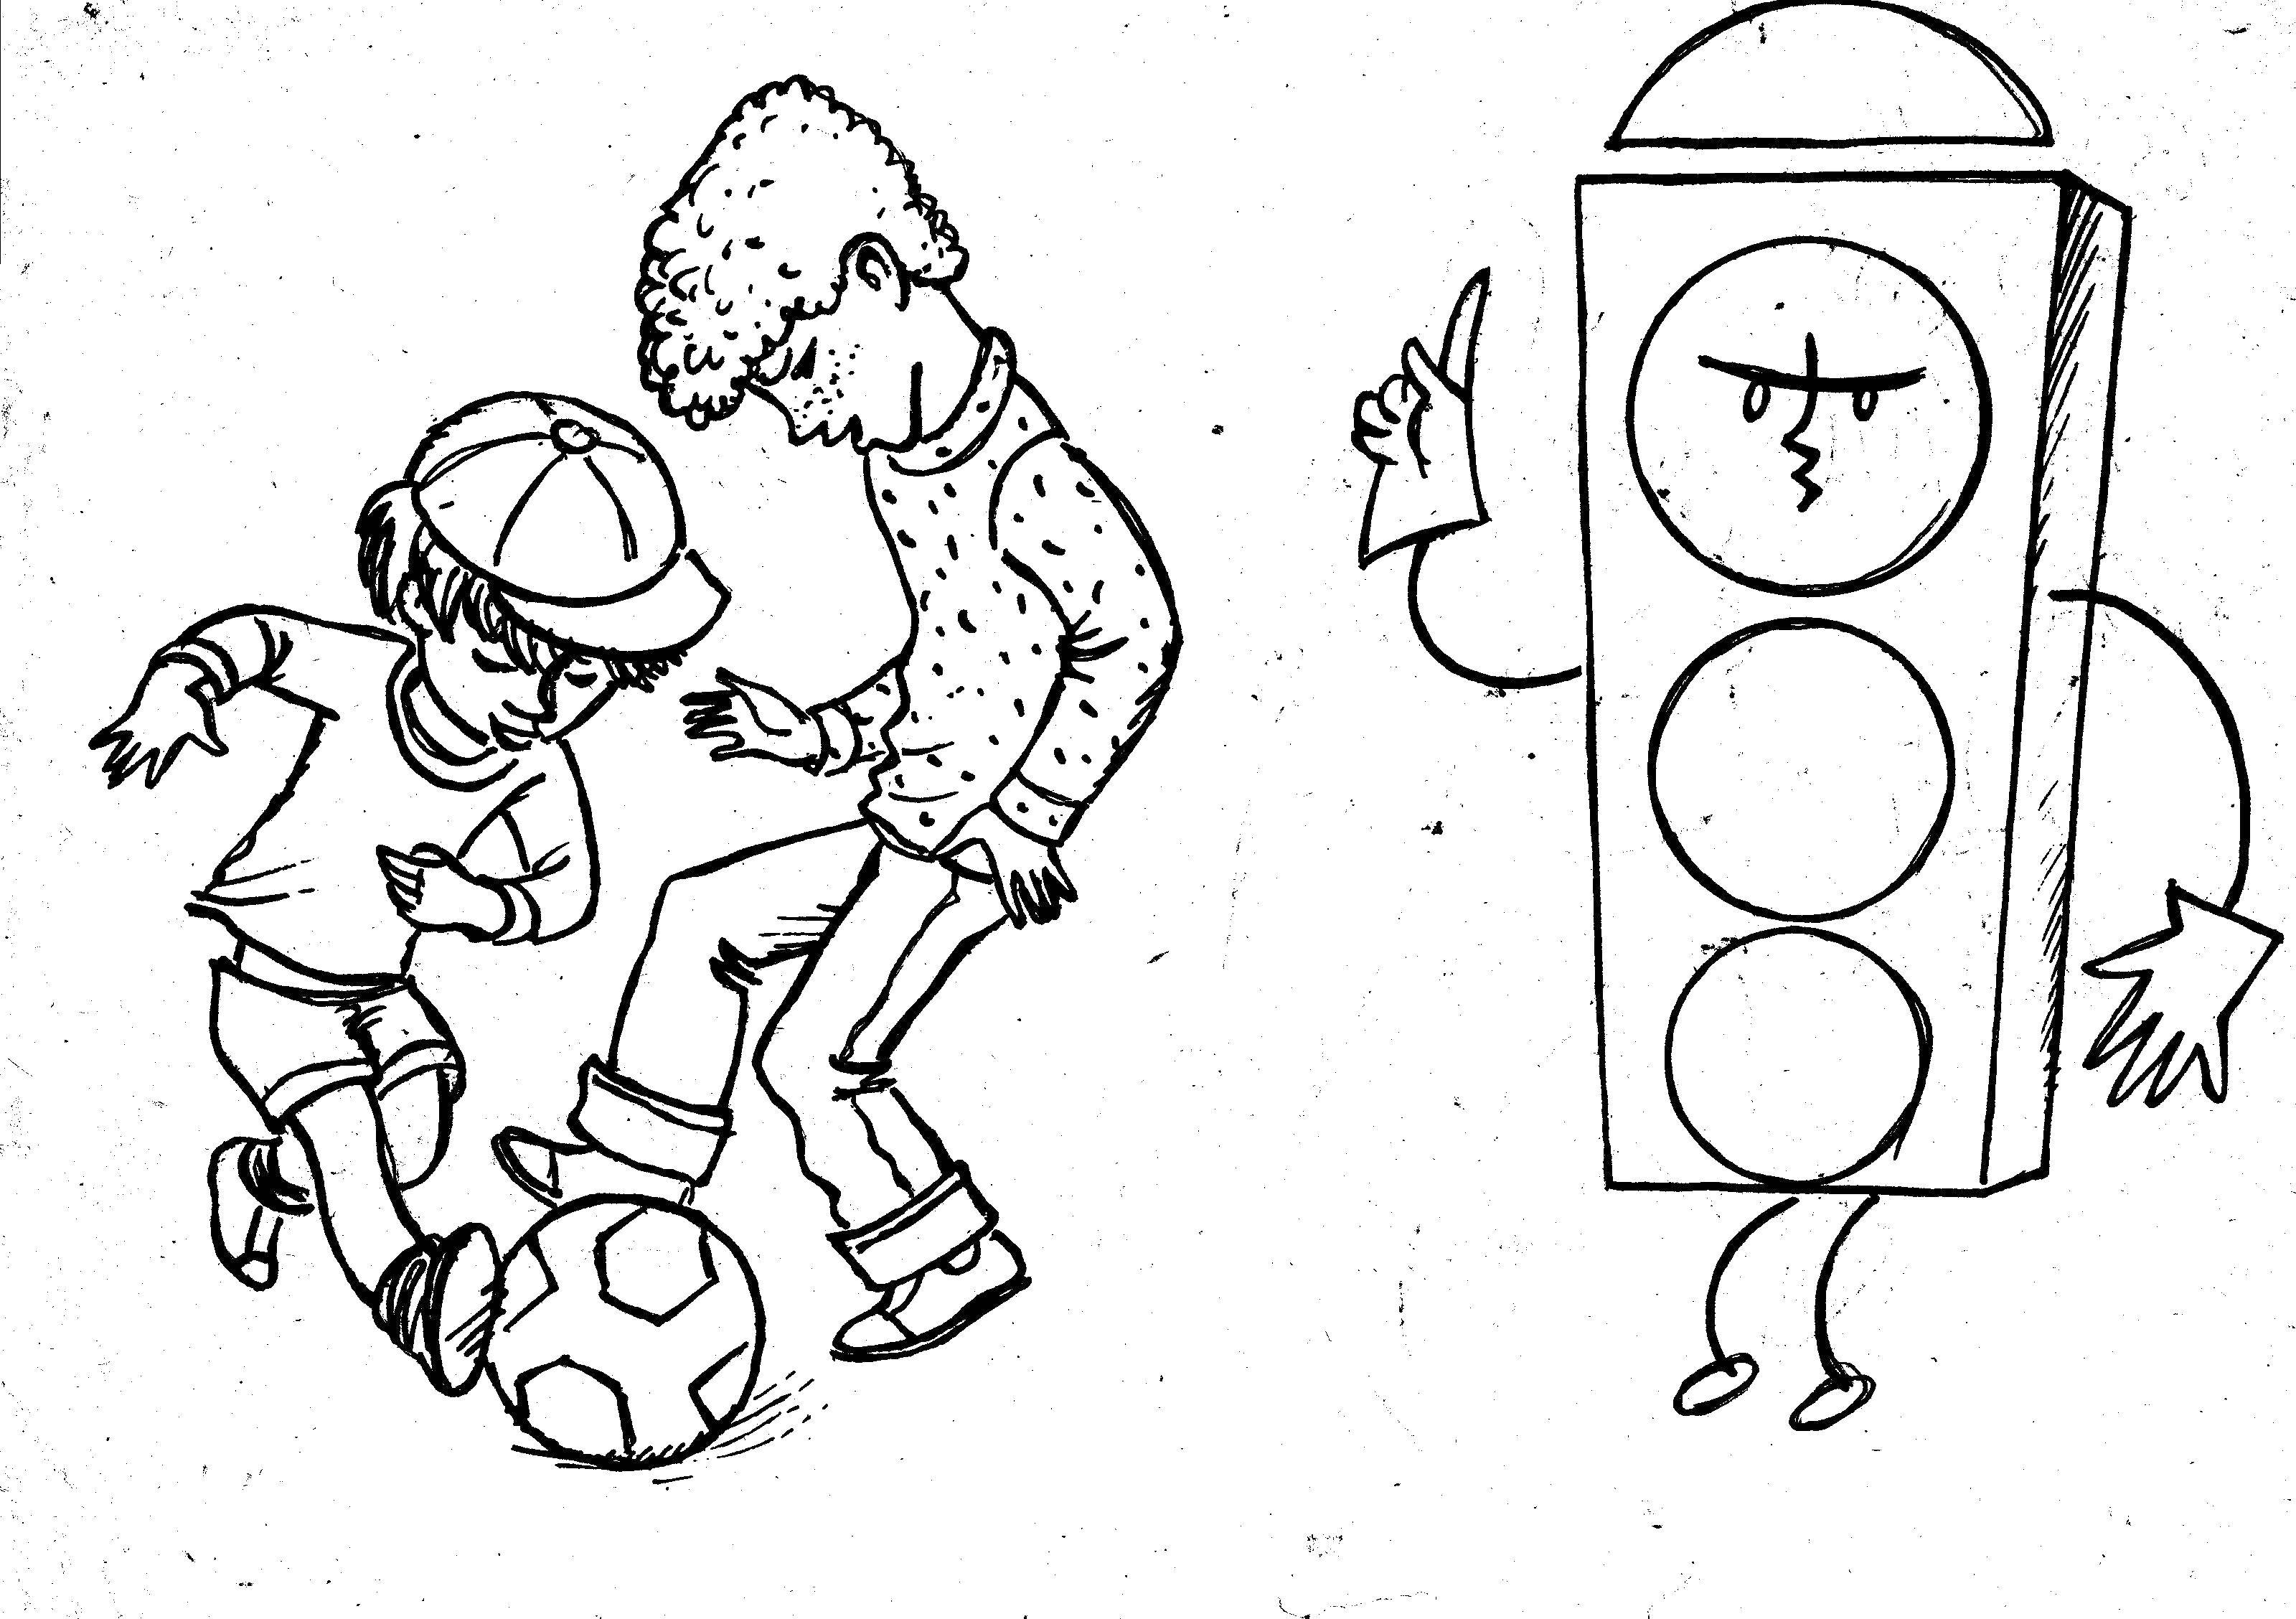 Coloring Children play football on the road. Category traffic light. Tags:  traffic light, car, road.